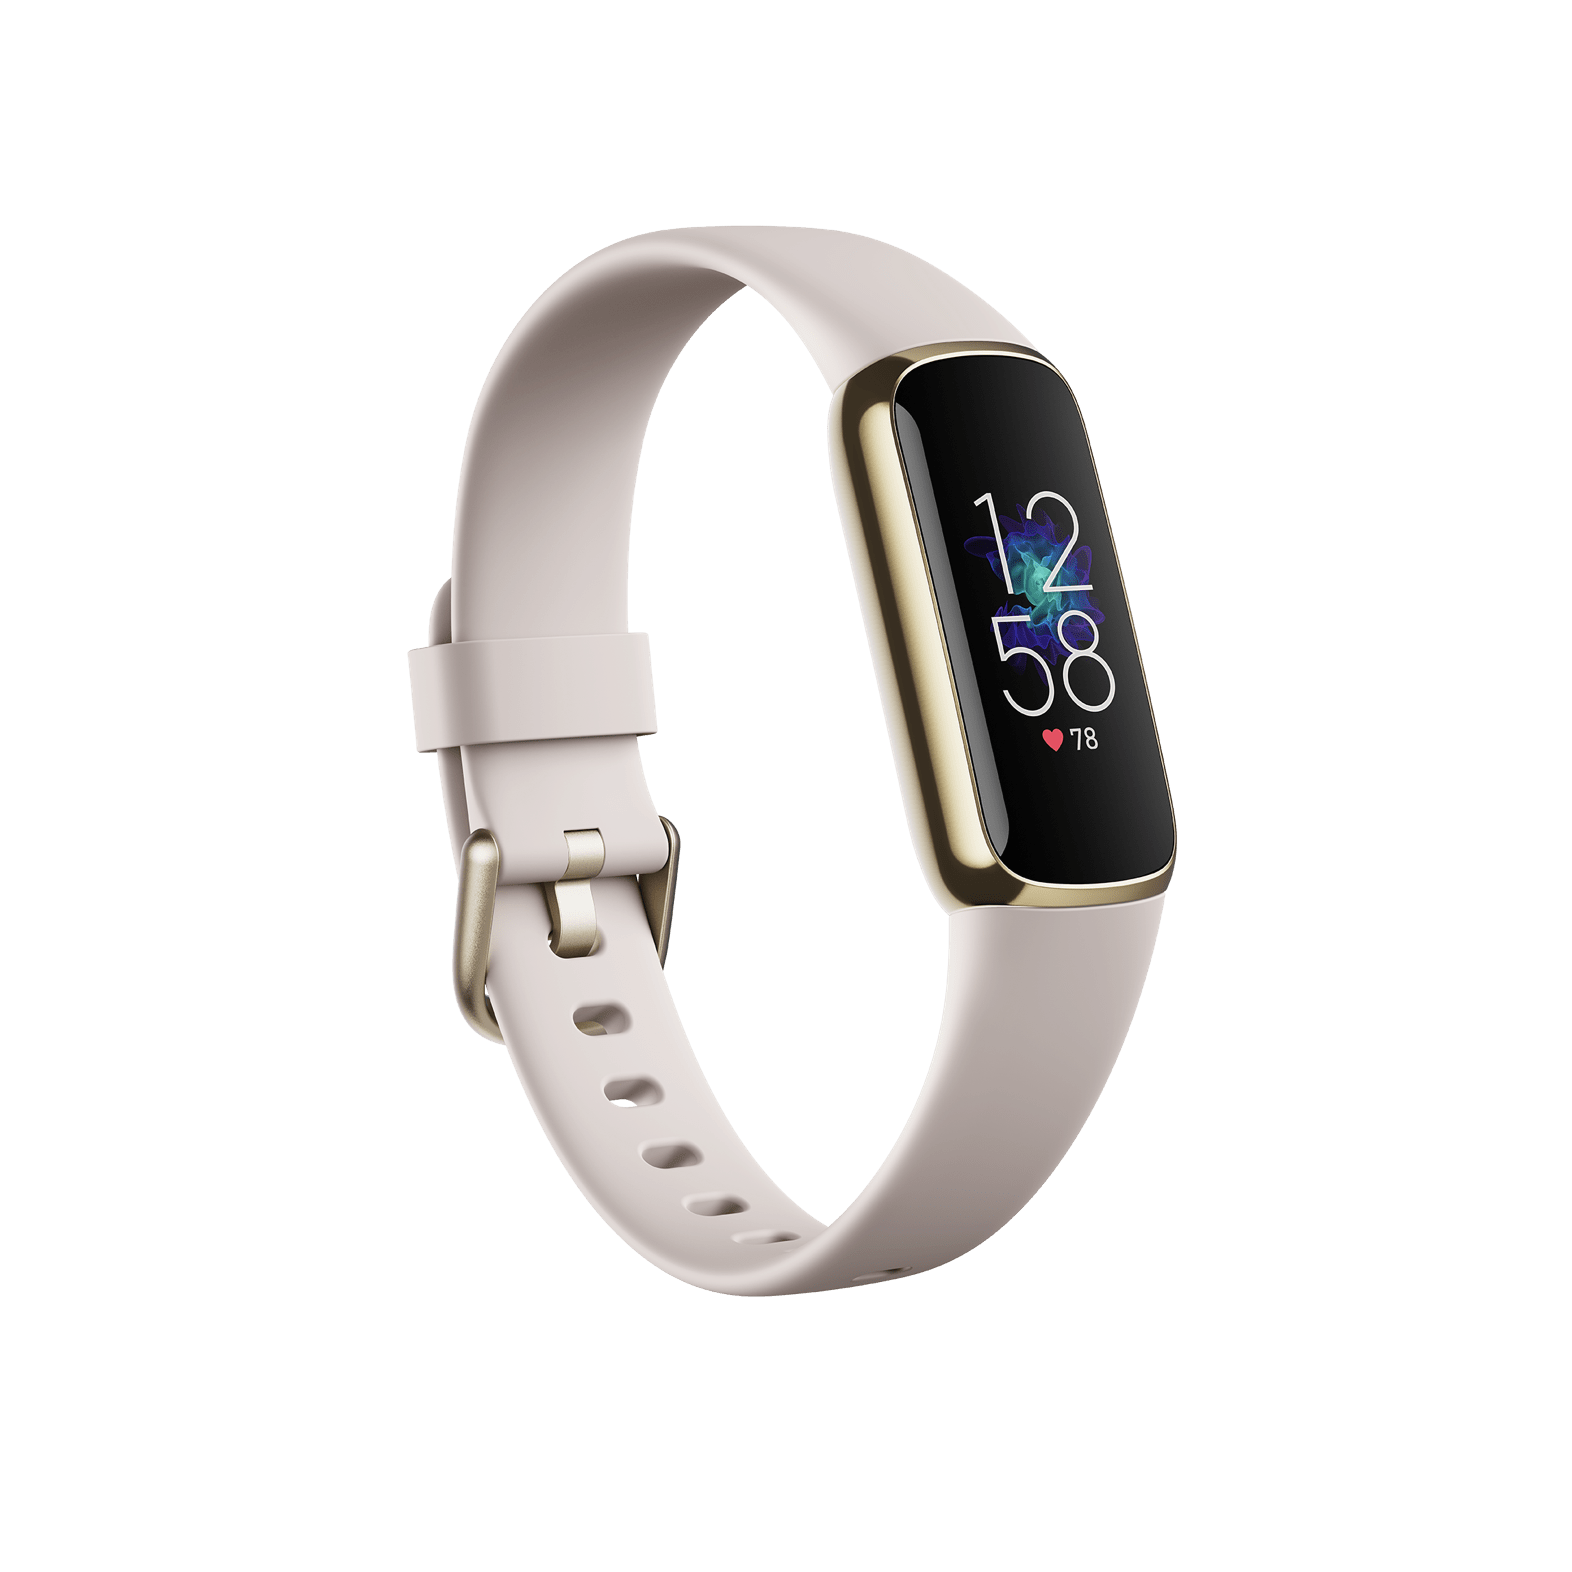 Testing The Apple Watch's Activity Competition Mode | aBlogtoWatch